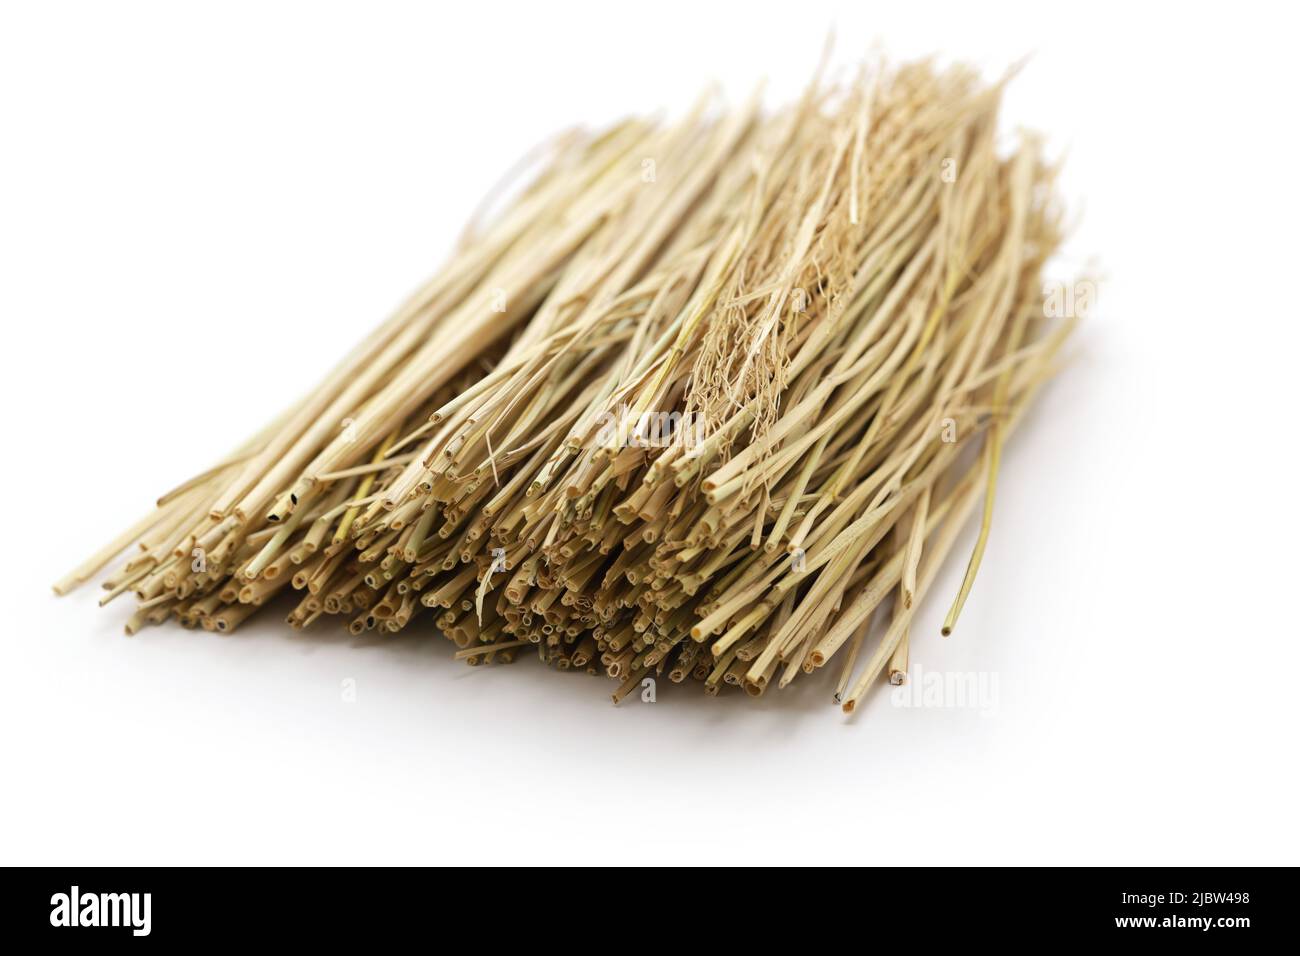 rice straw, fuel for cooking light grill bonito Stock Photo